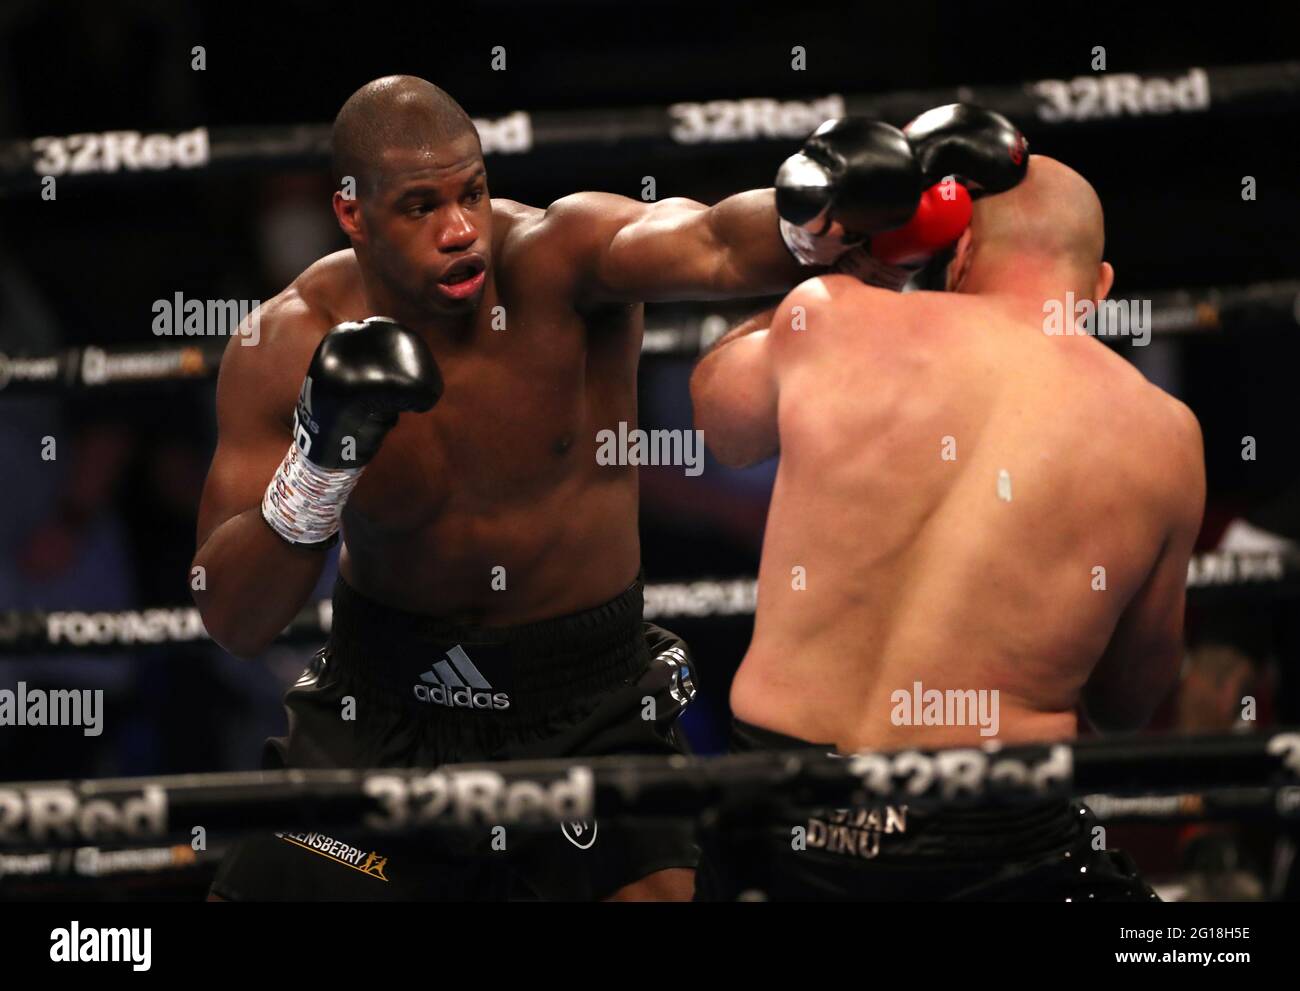 Daniel Dubois (left) and Bogdan Dinu in the WBA Interim Heavyweight Championship during the Boxing event at the Telford International Centre, Telford. Picture date: Saturday June 5, 2021. Stock Photo